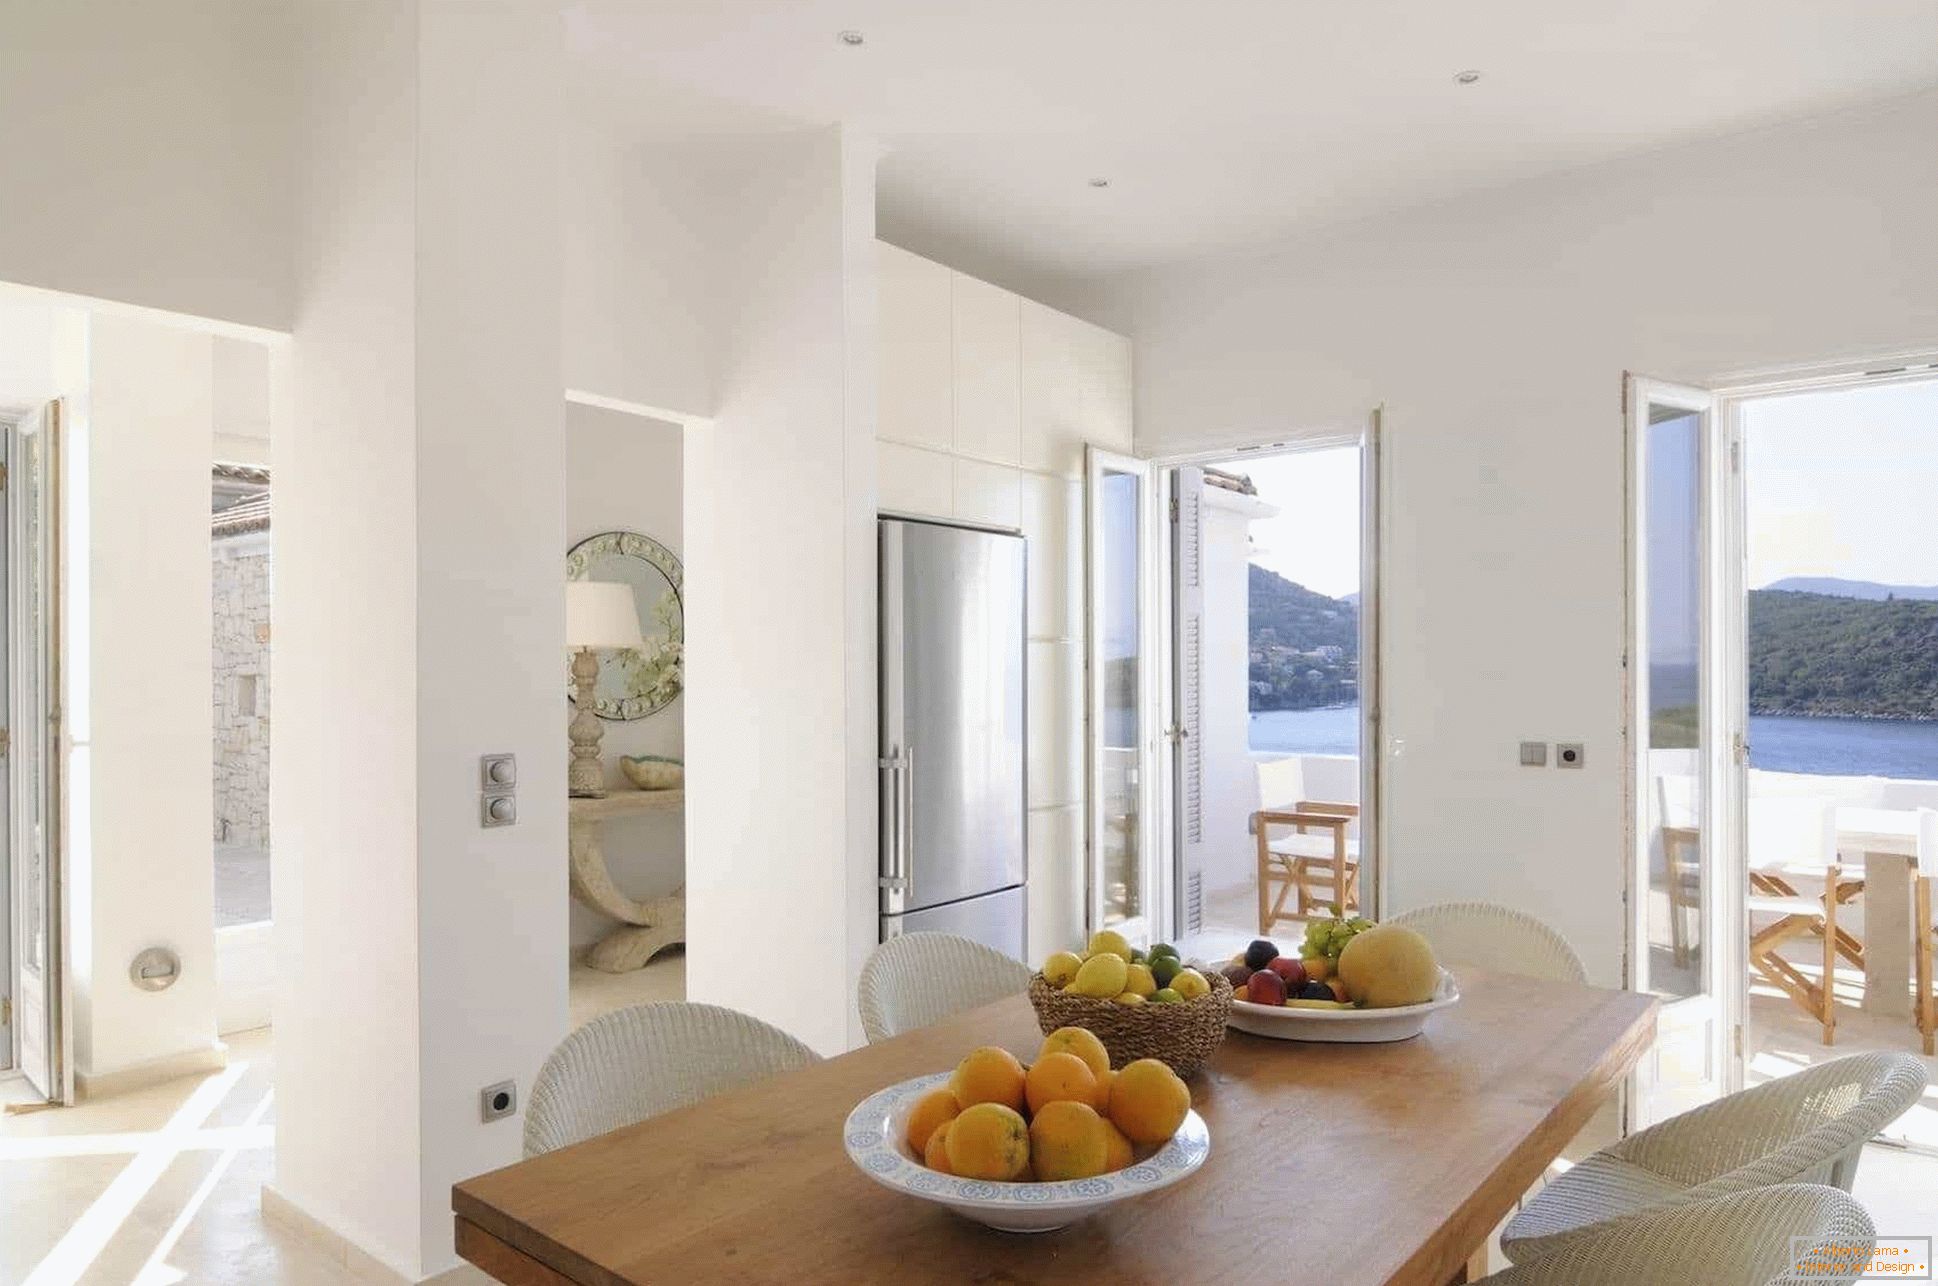 Panoramic windows are inherent in the Greek style of the interior